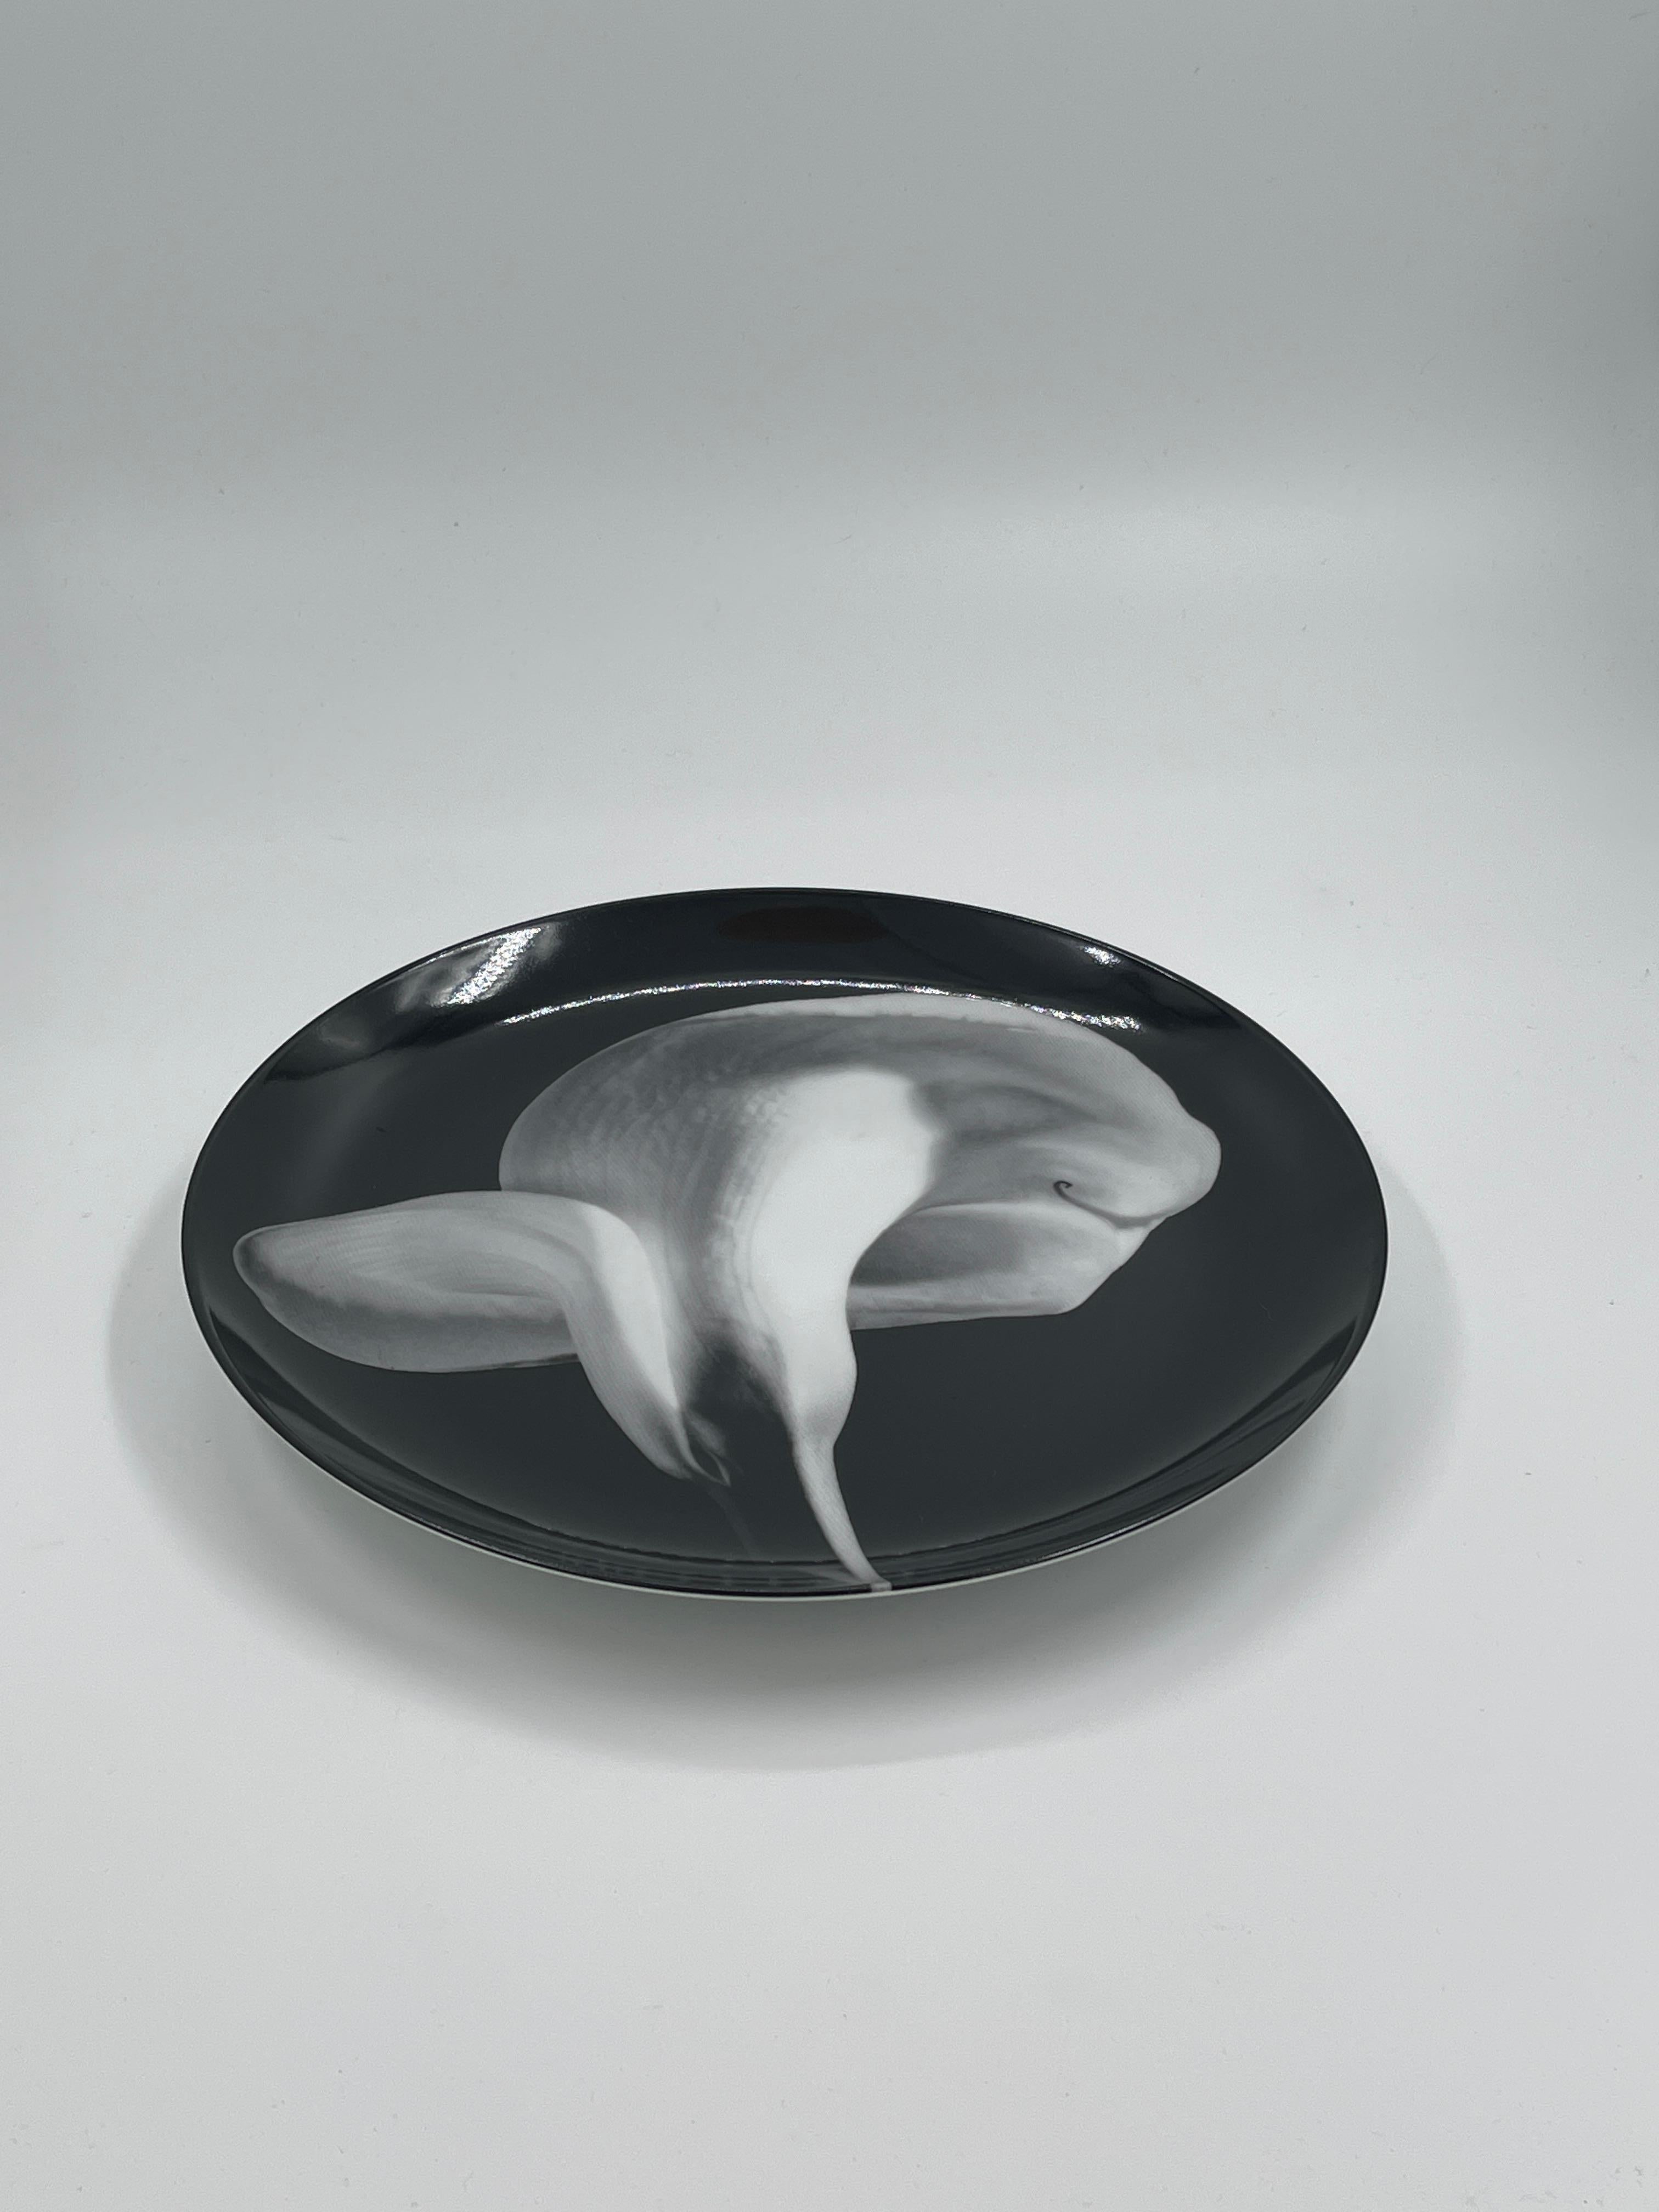 Japanese Swid Powell - Robert Mapplethorpe Porcelain Plates, Orchid - Flower - Calla Lily For Sale